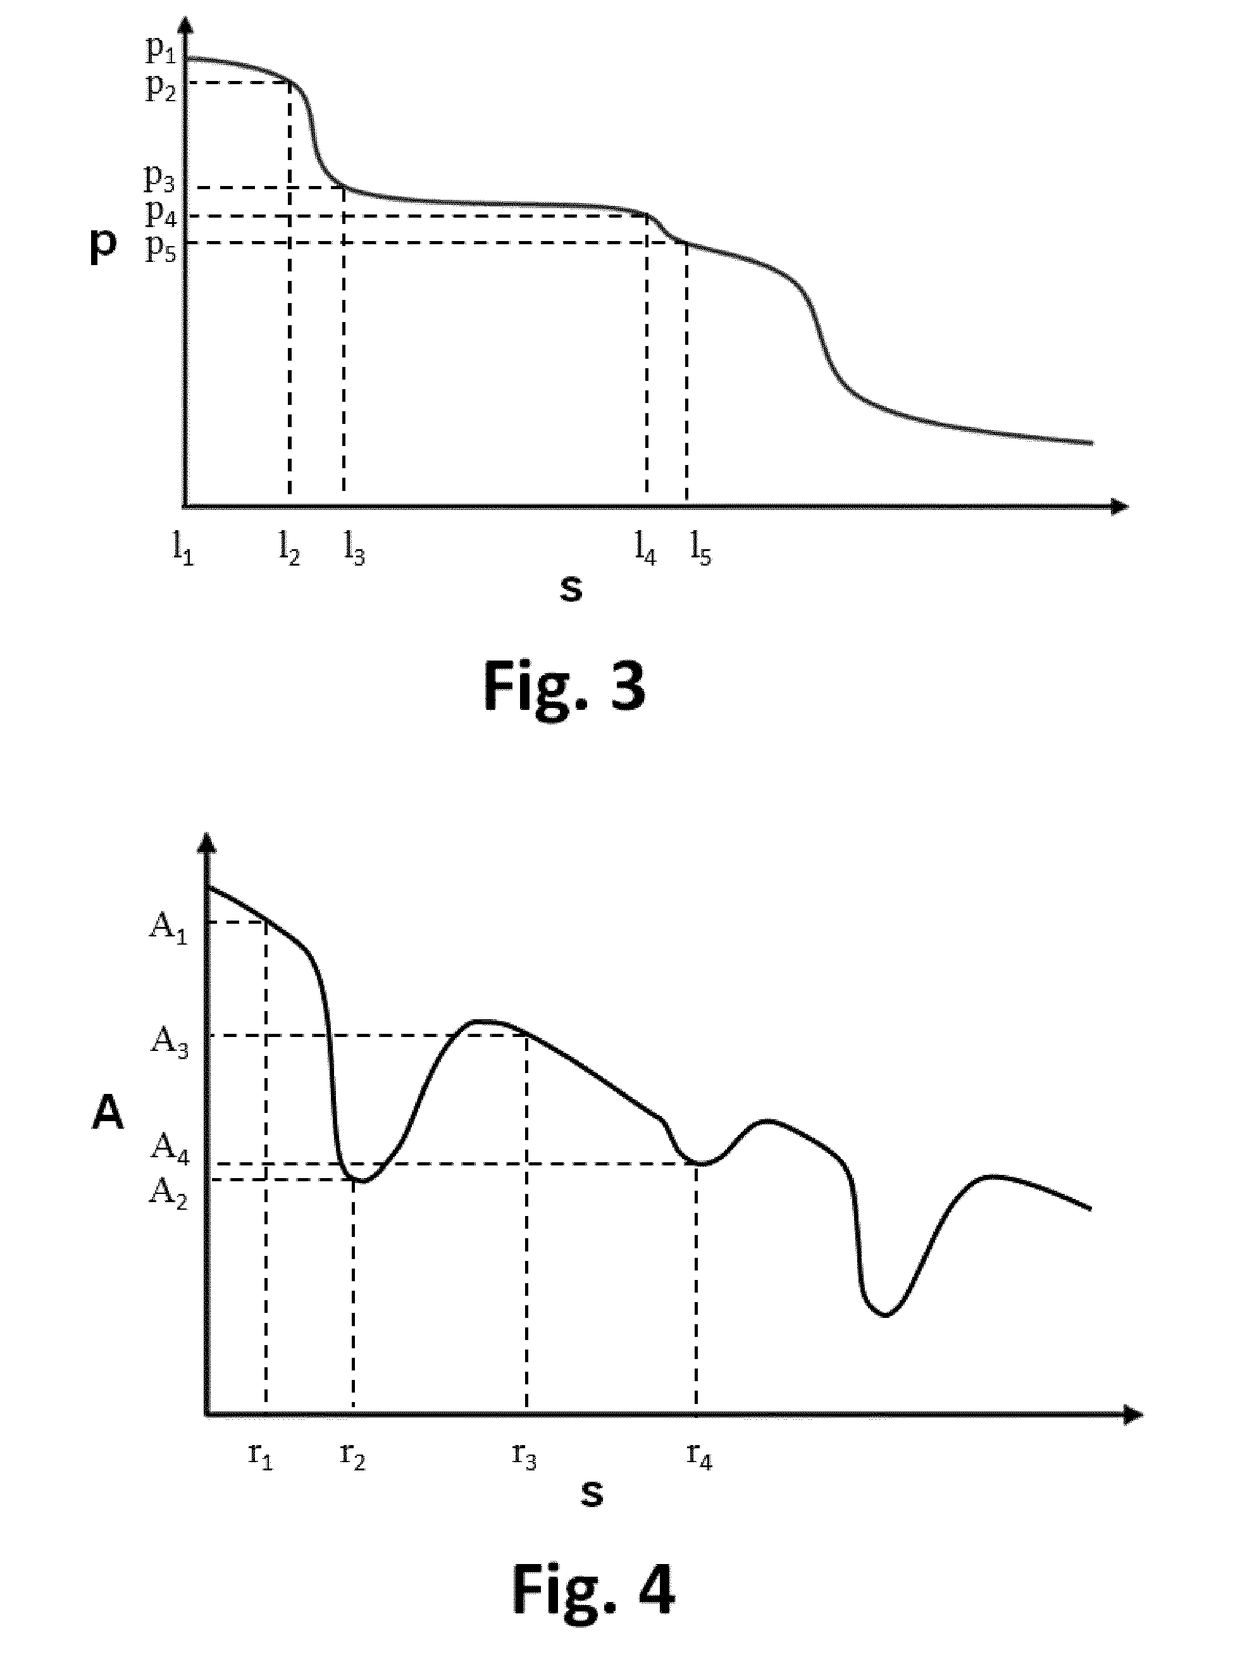 Apparatus for vessel characterization